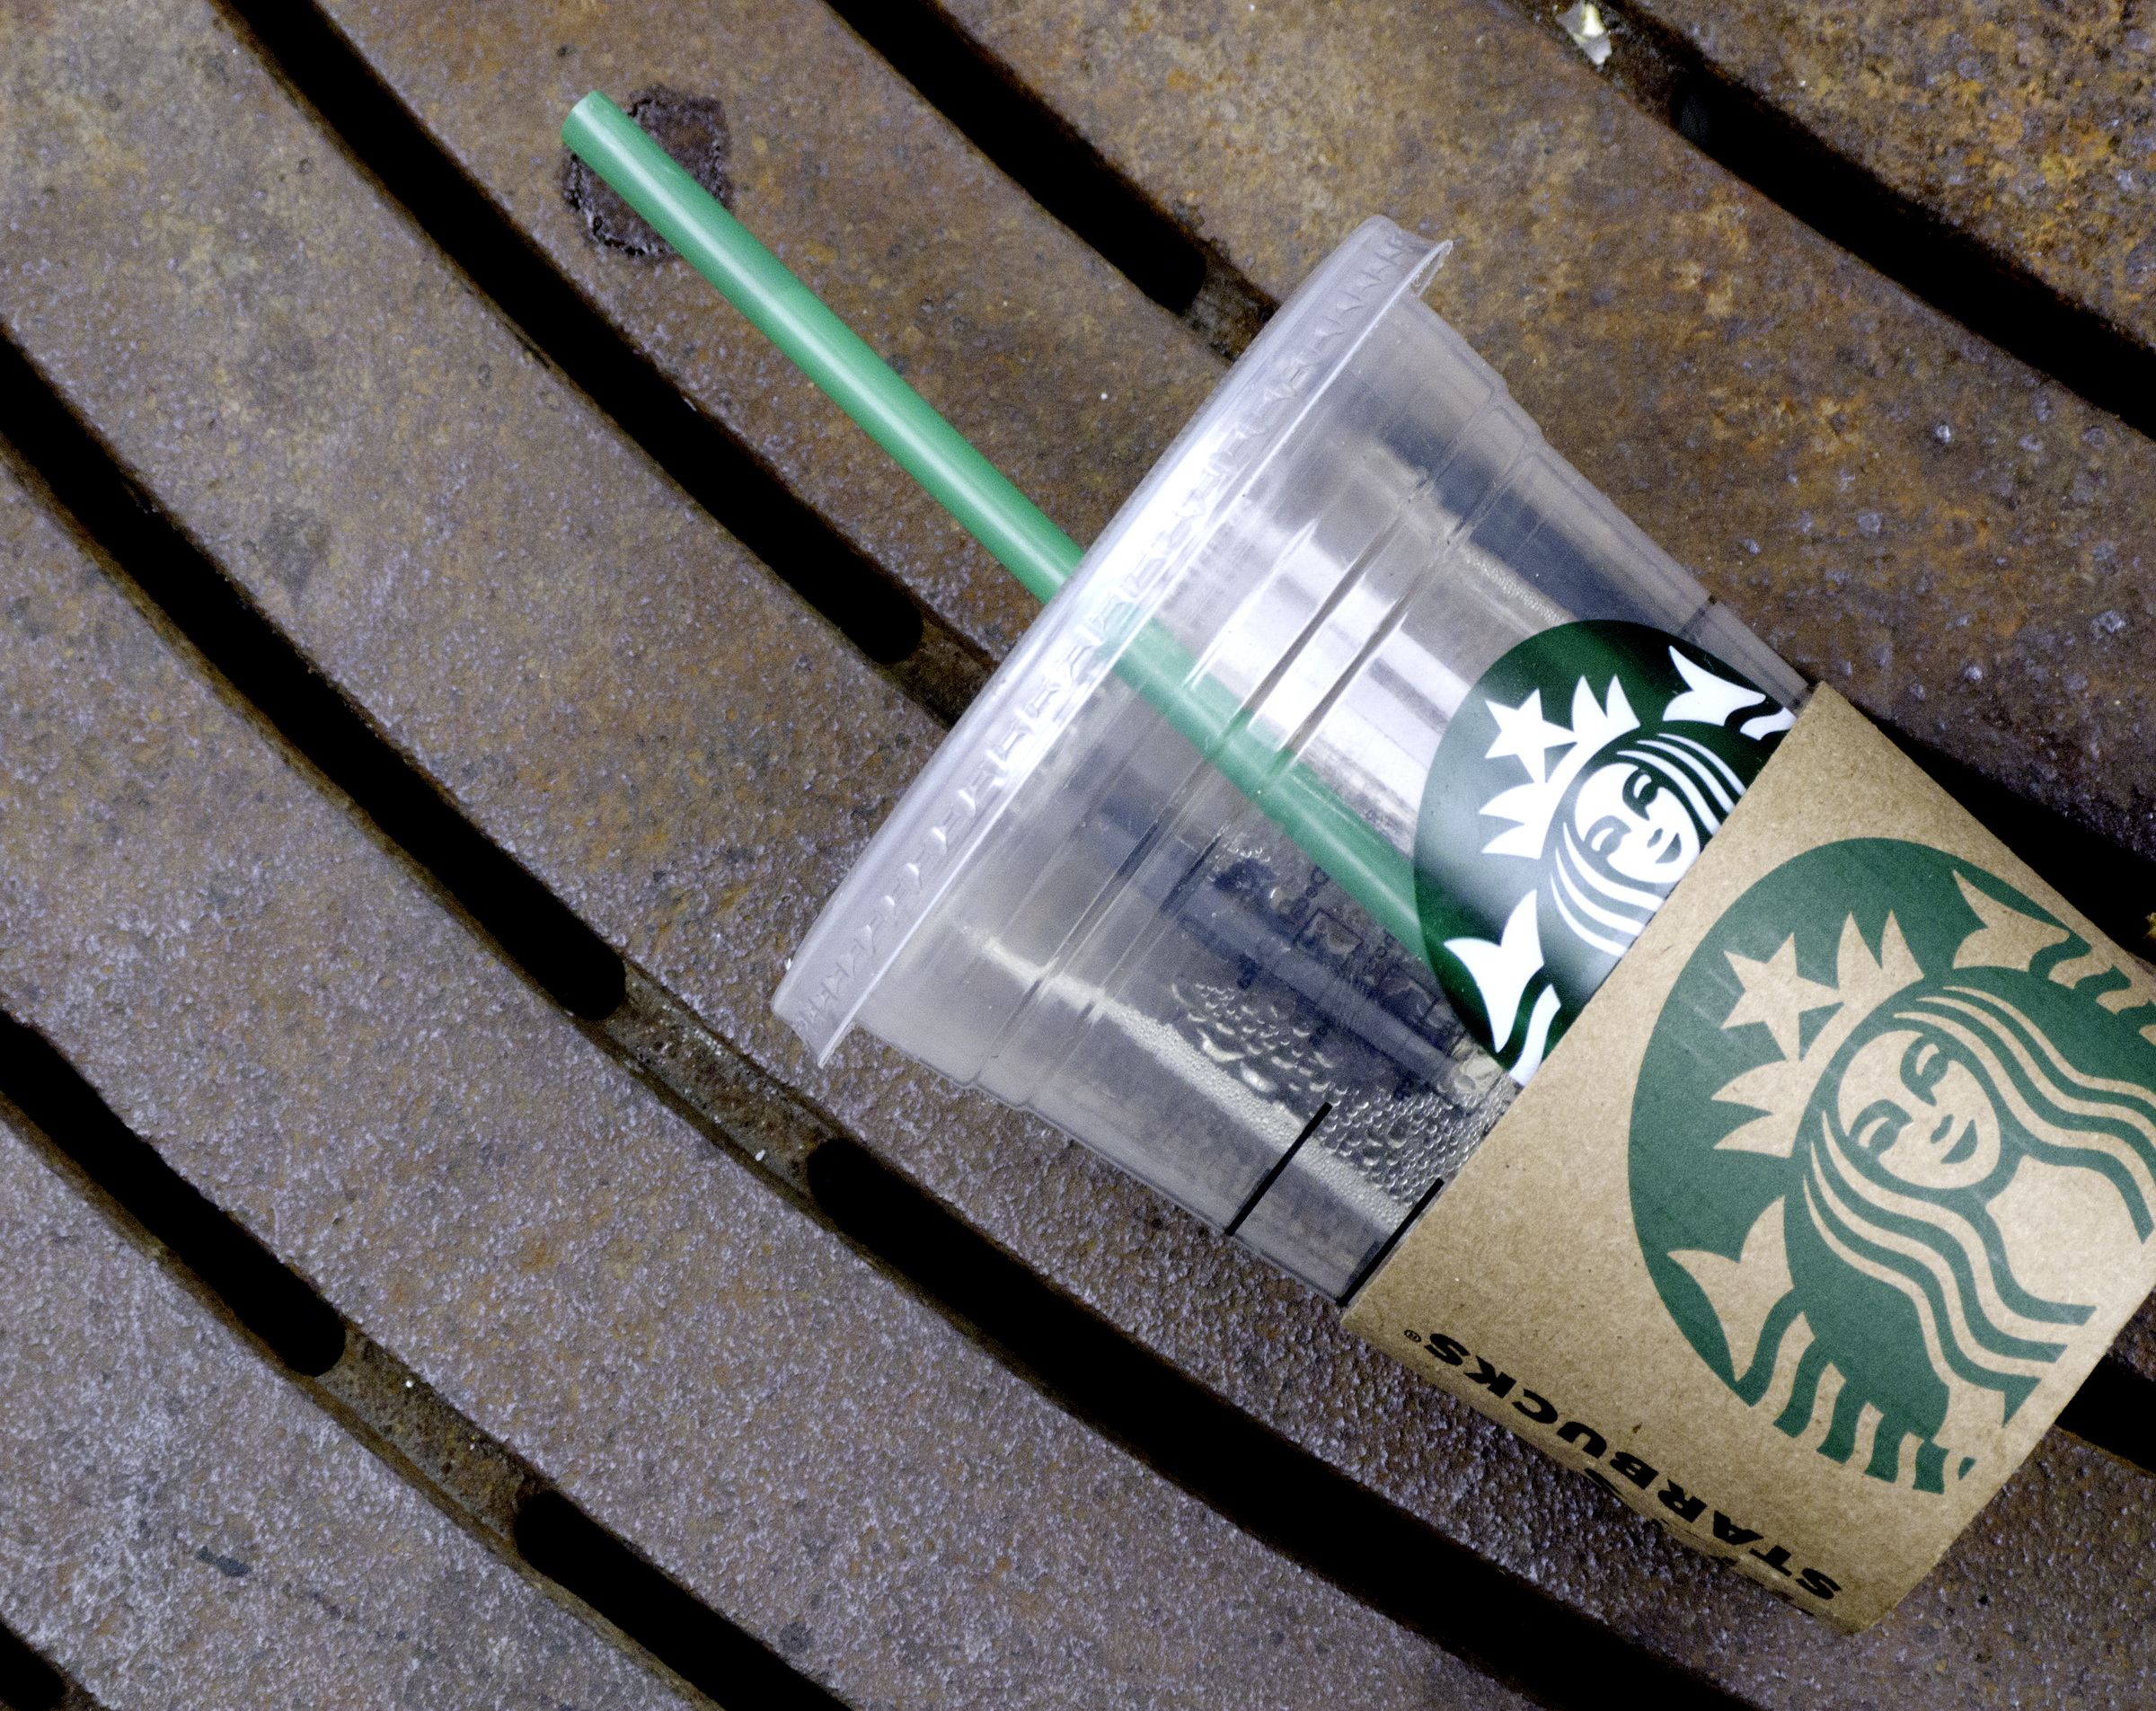 Made a post about where can I find replacement straws : r/starbucks